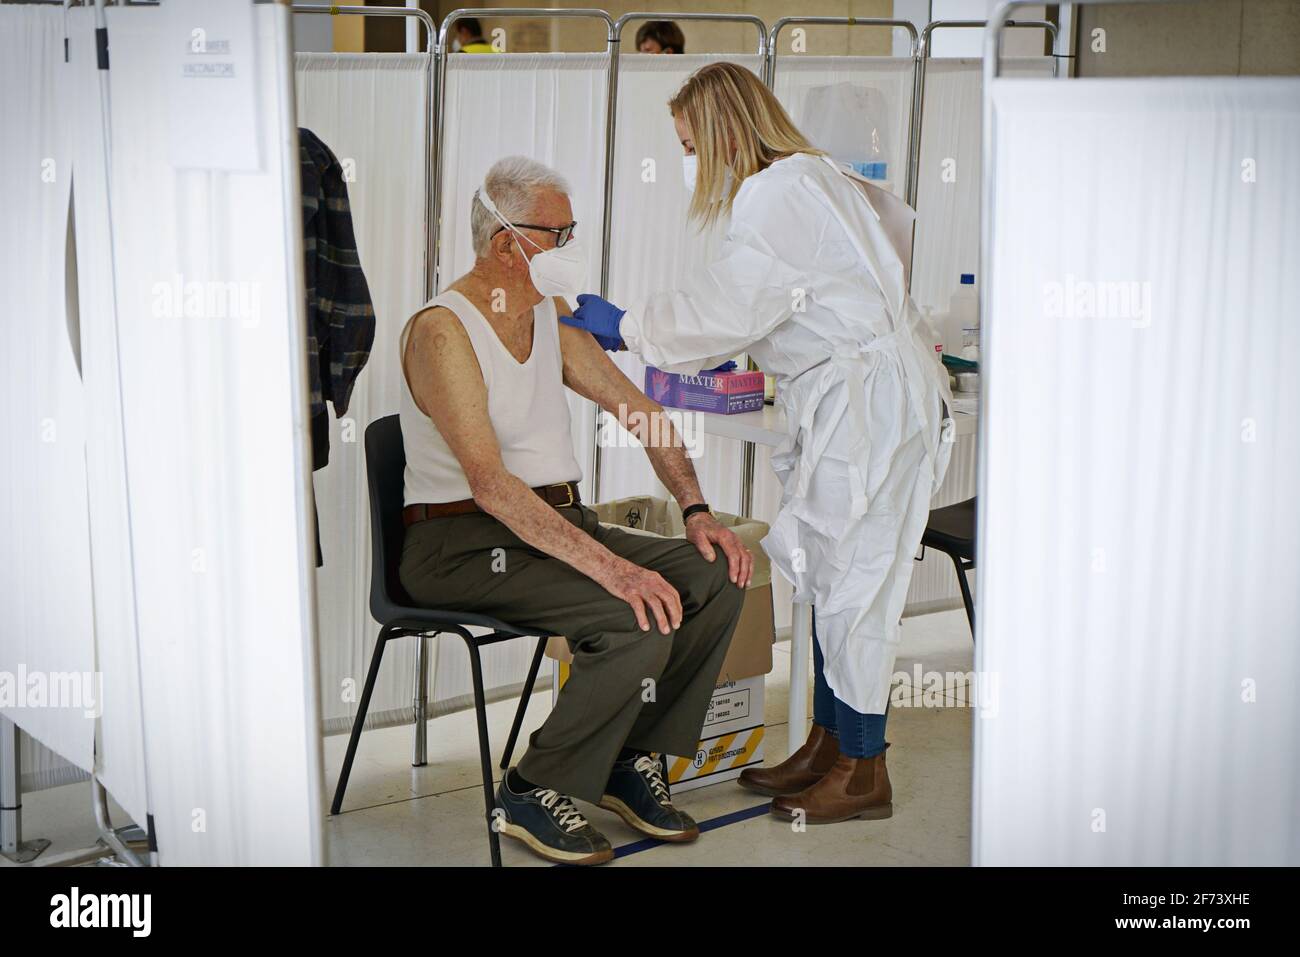 Vaccination centre against Covid-19 for elderly octogenarians. Turin, Italy - April 2021 Stock Photo